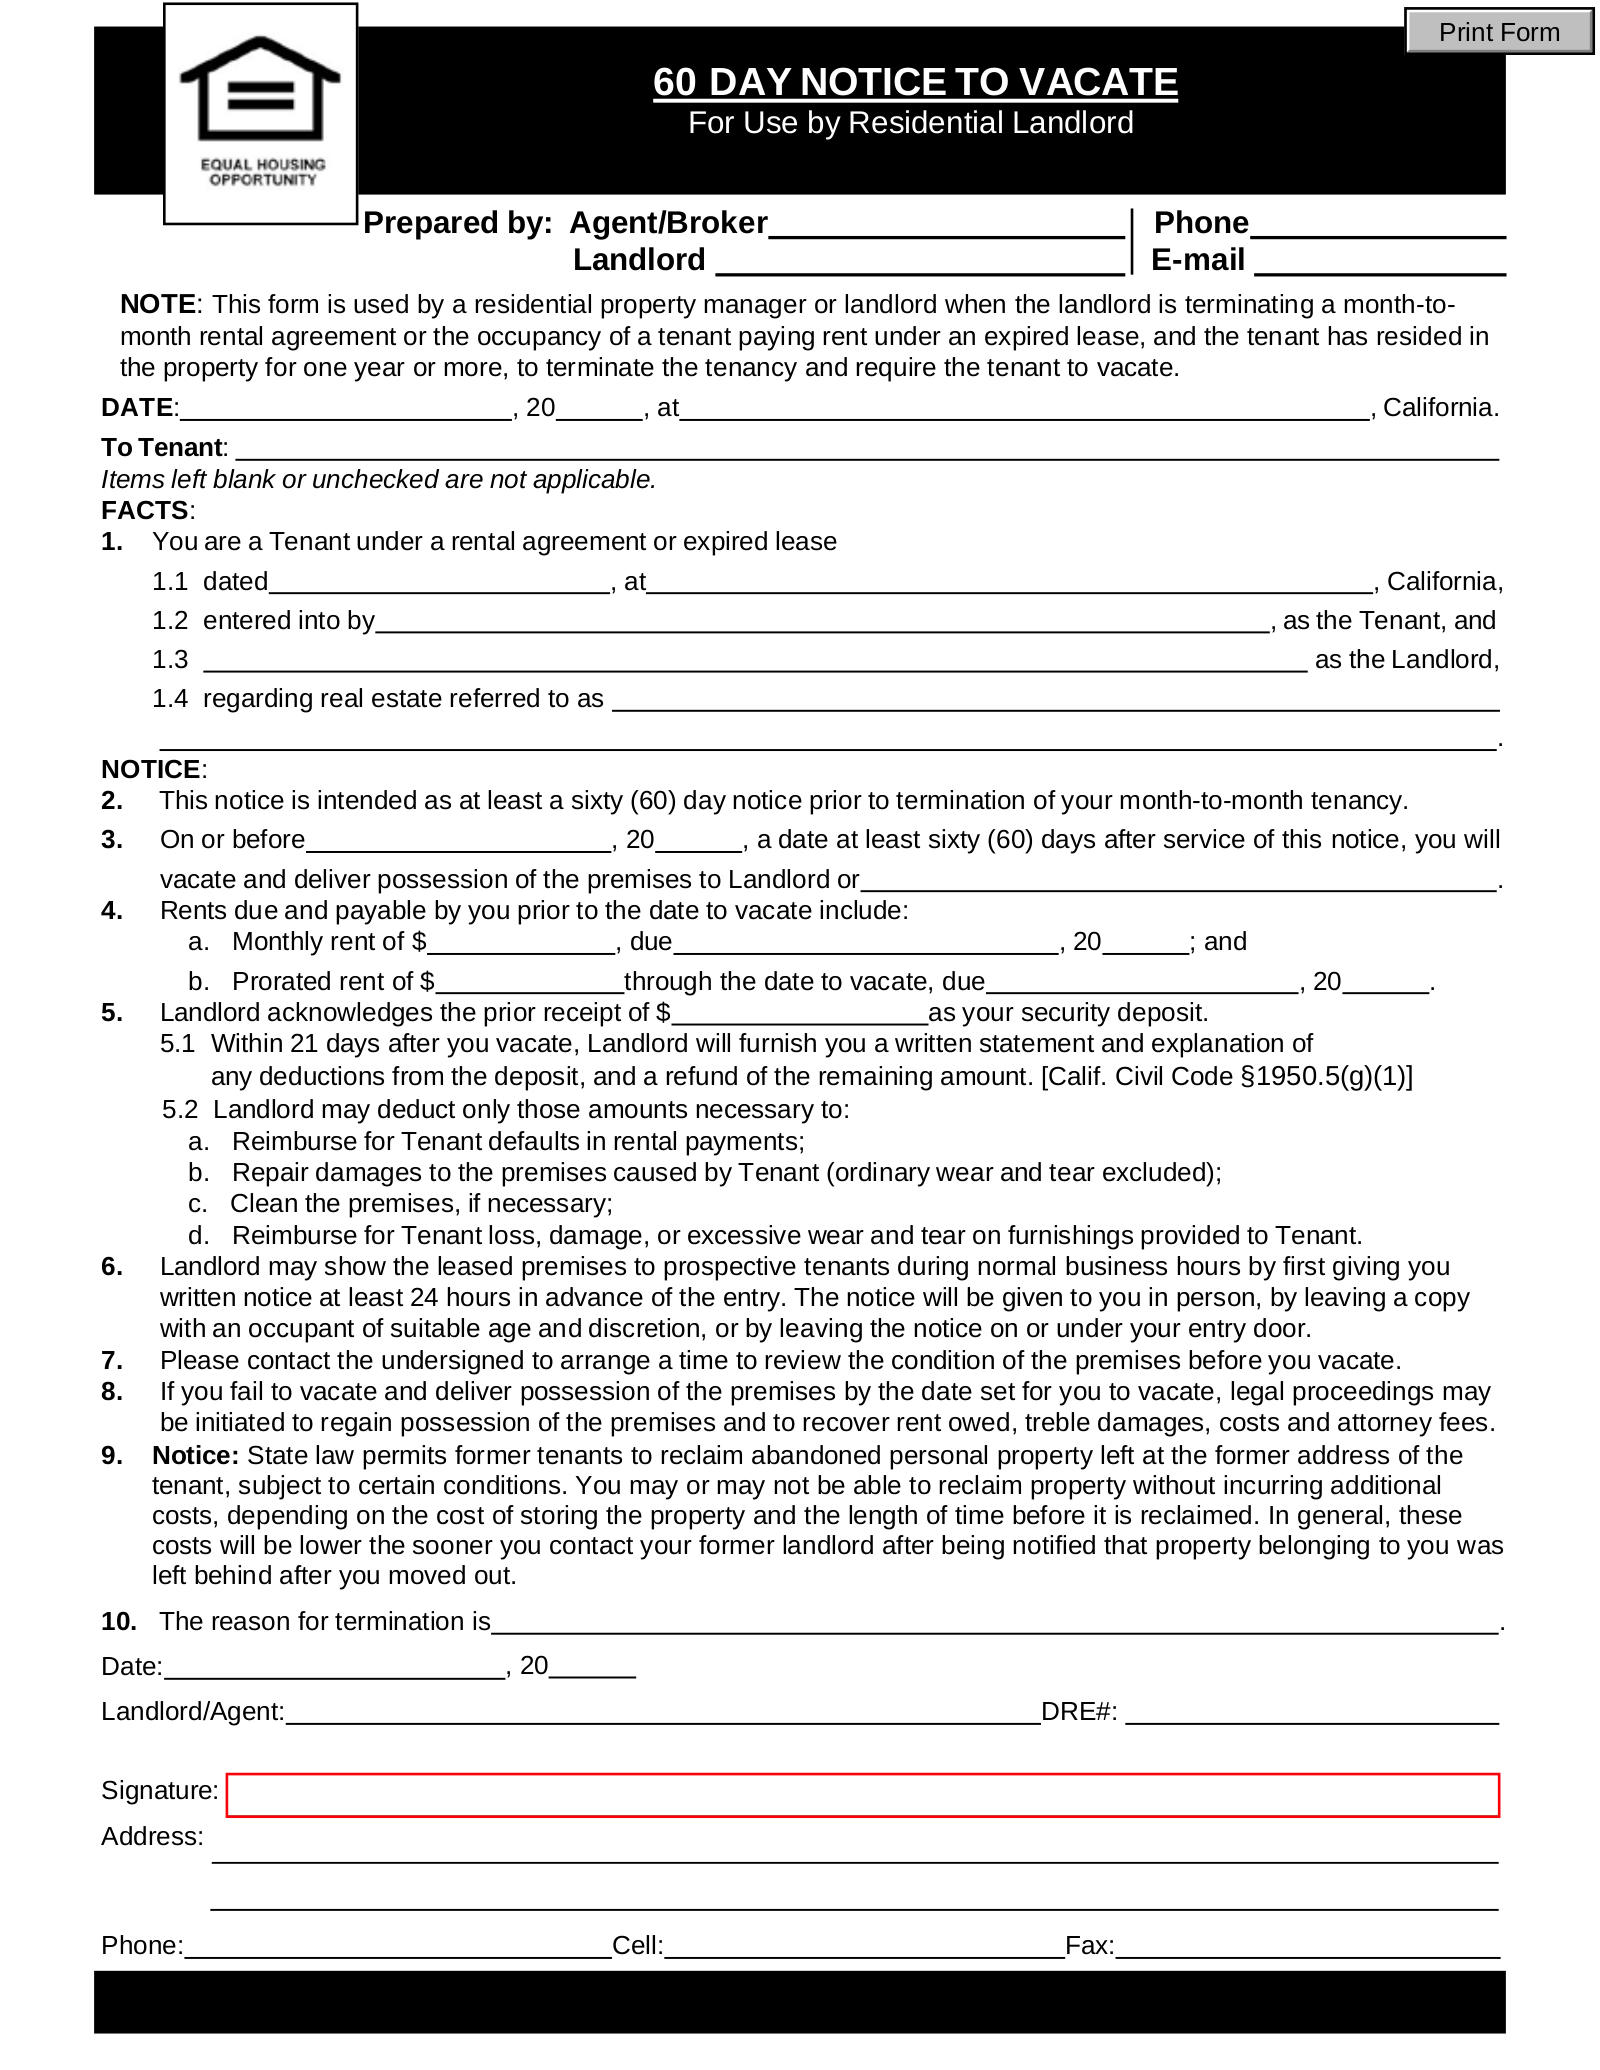 notice-to-vacate-template-california-tutore-org-master-of-documents